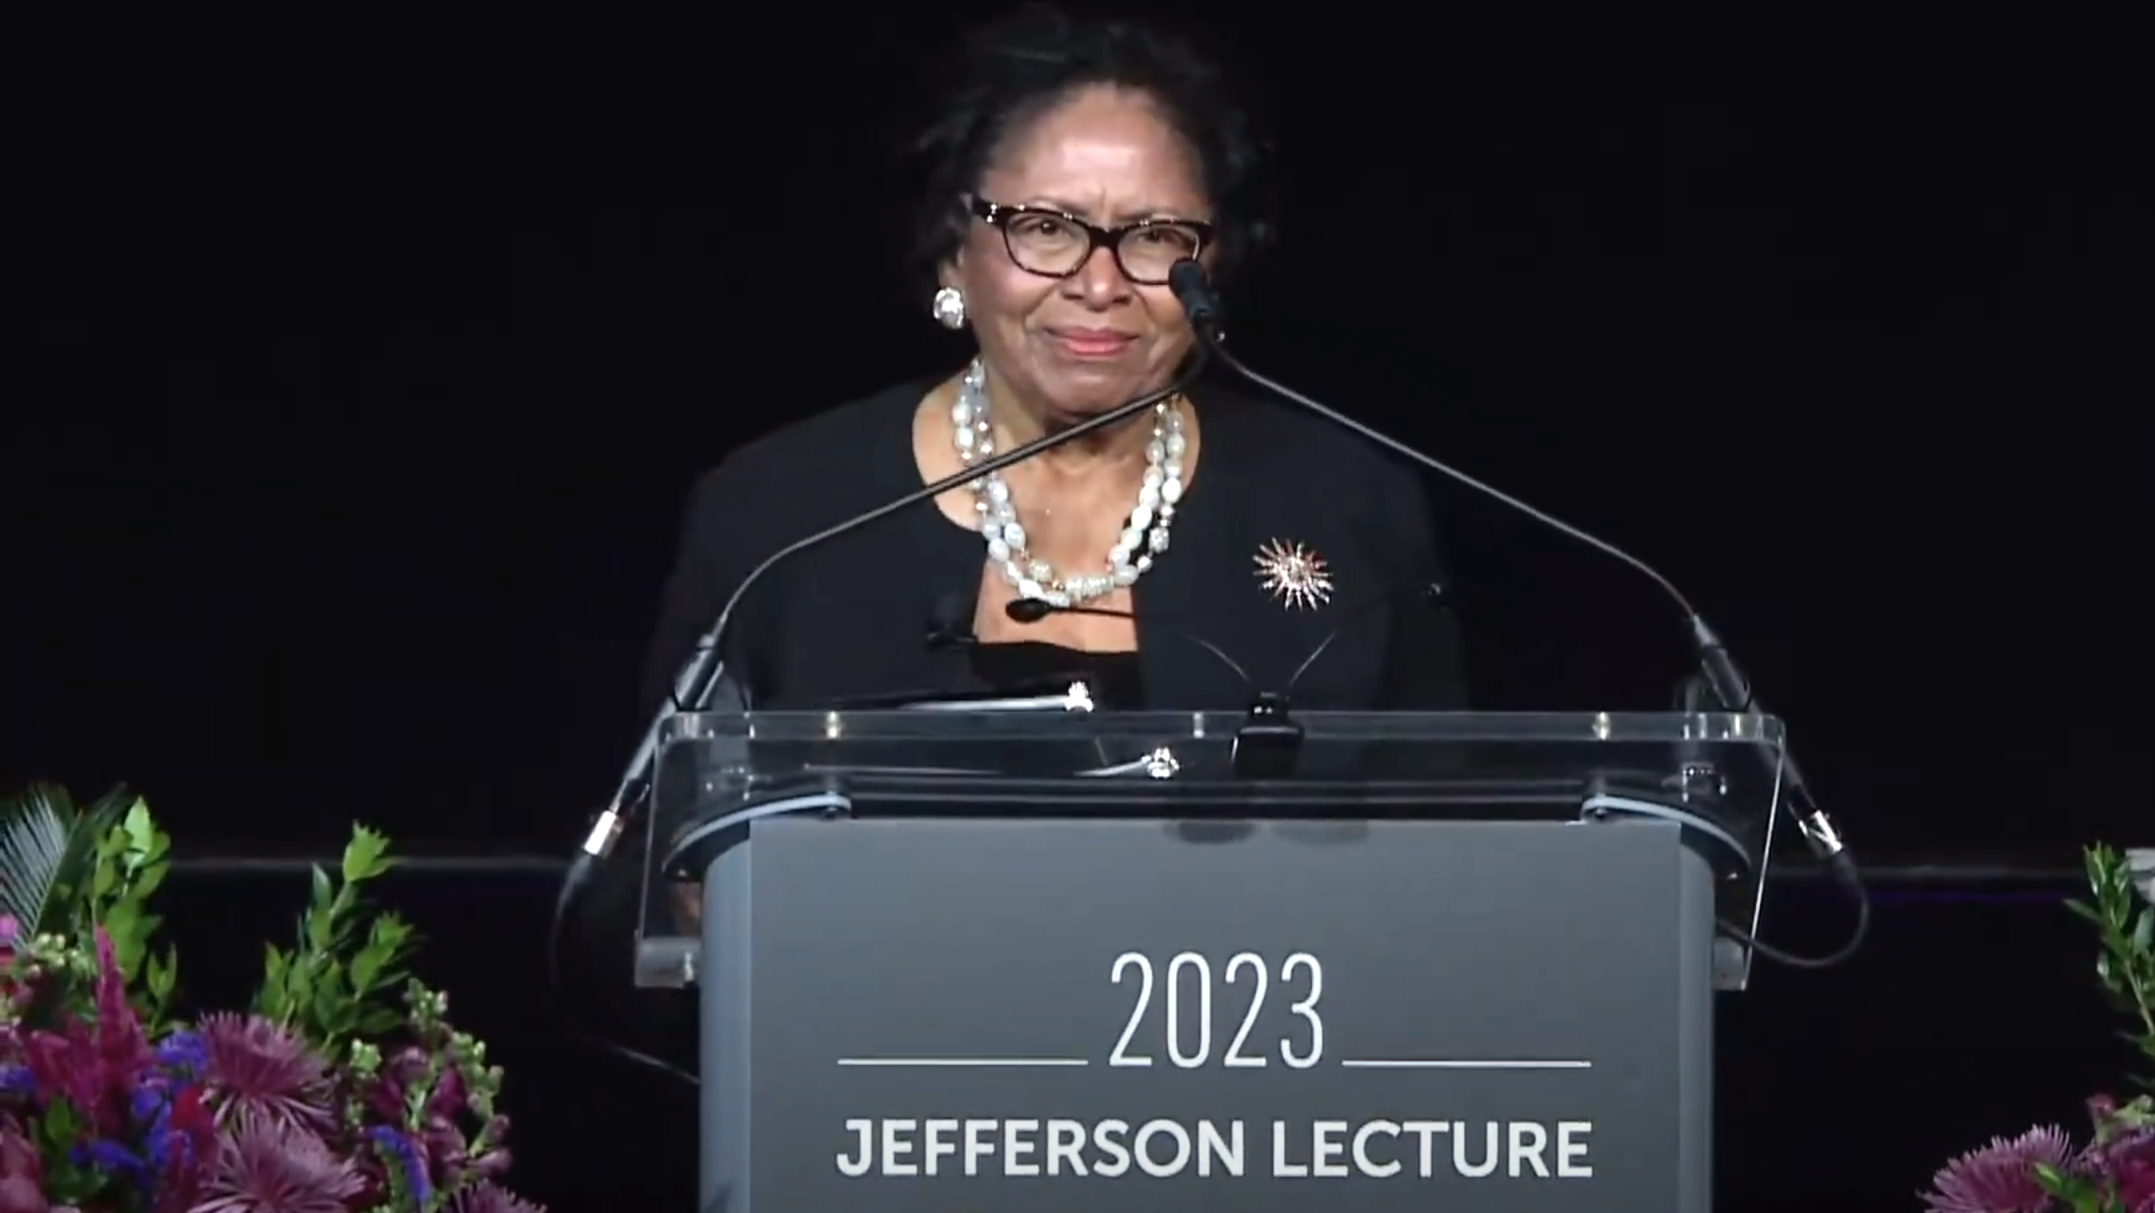 Ruth Simmons, Fulbright Alum and Higher Education Leader, Delivers 2023 Jefferson Lecture in the Humanities